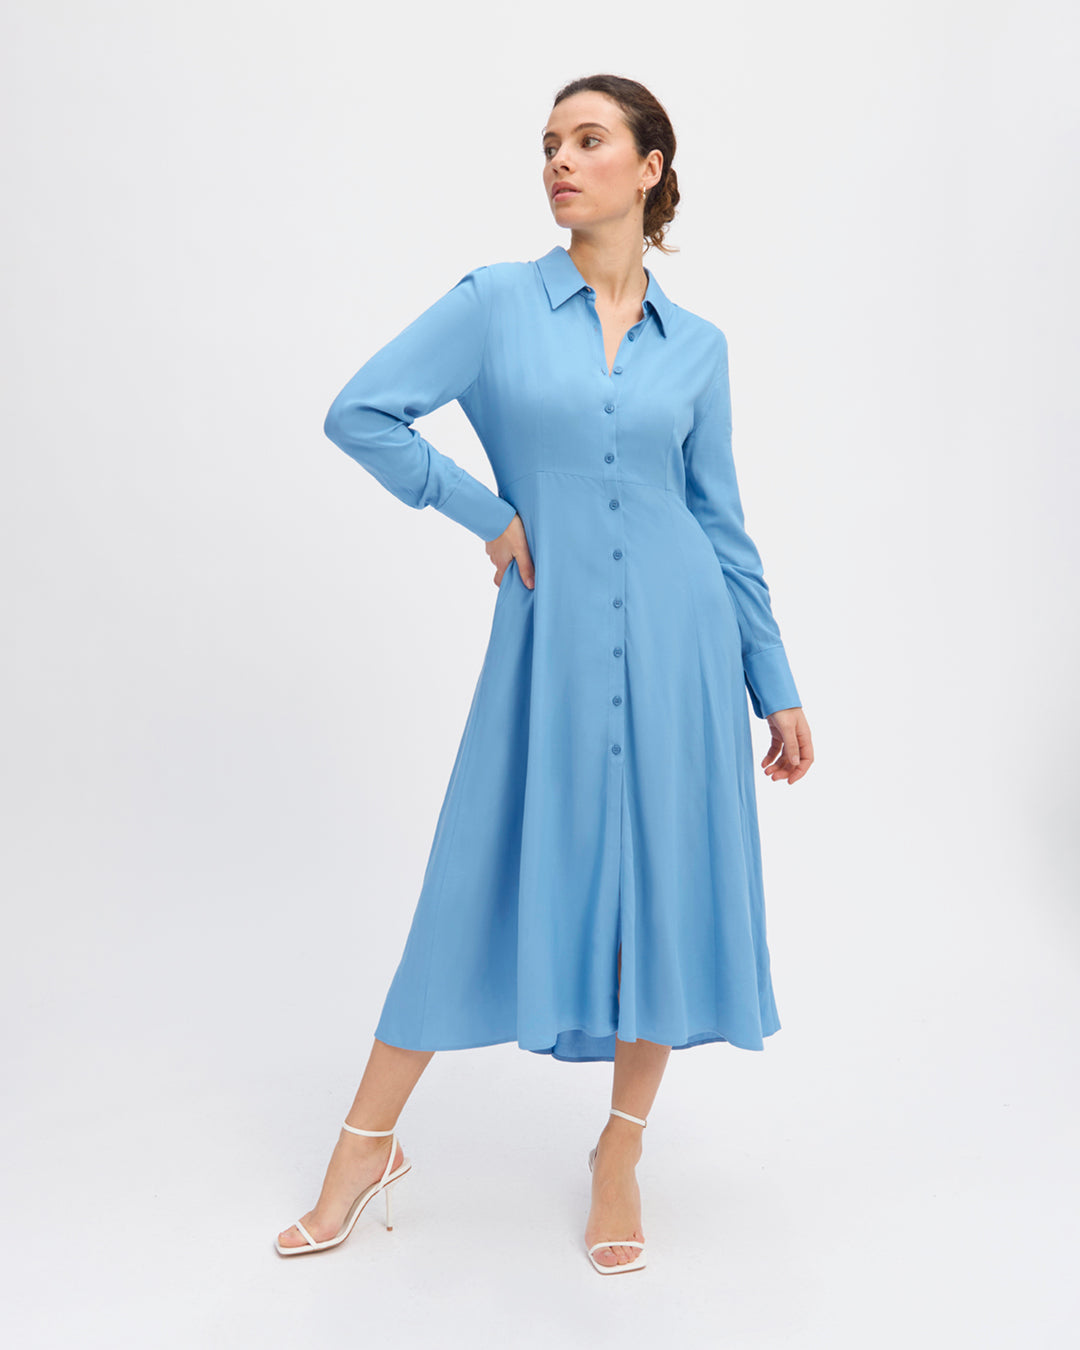 Blue-dress-Long-midday-Collar-blouse-Long-sleeves-with-buttoned-knuckles-Hidden-button-flap-Fitted-at-the-waist-17H10-tailors-for-women-paris-